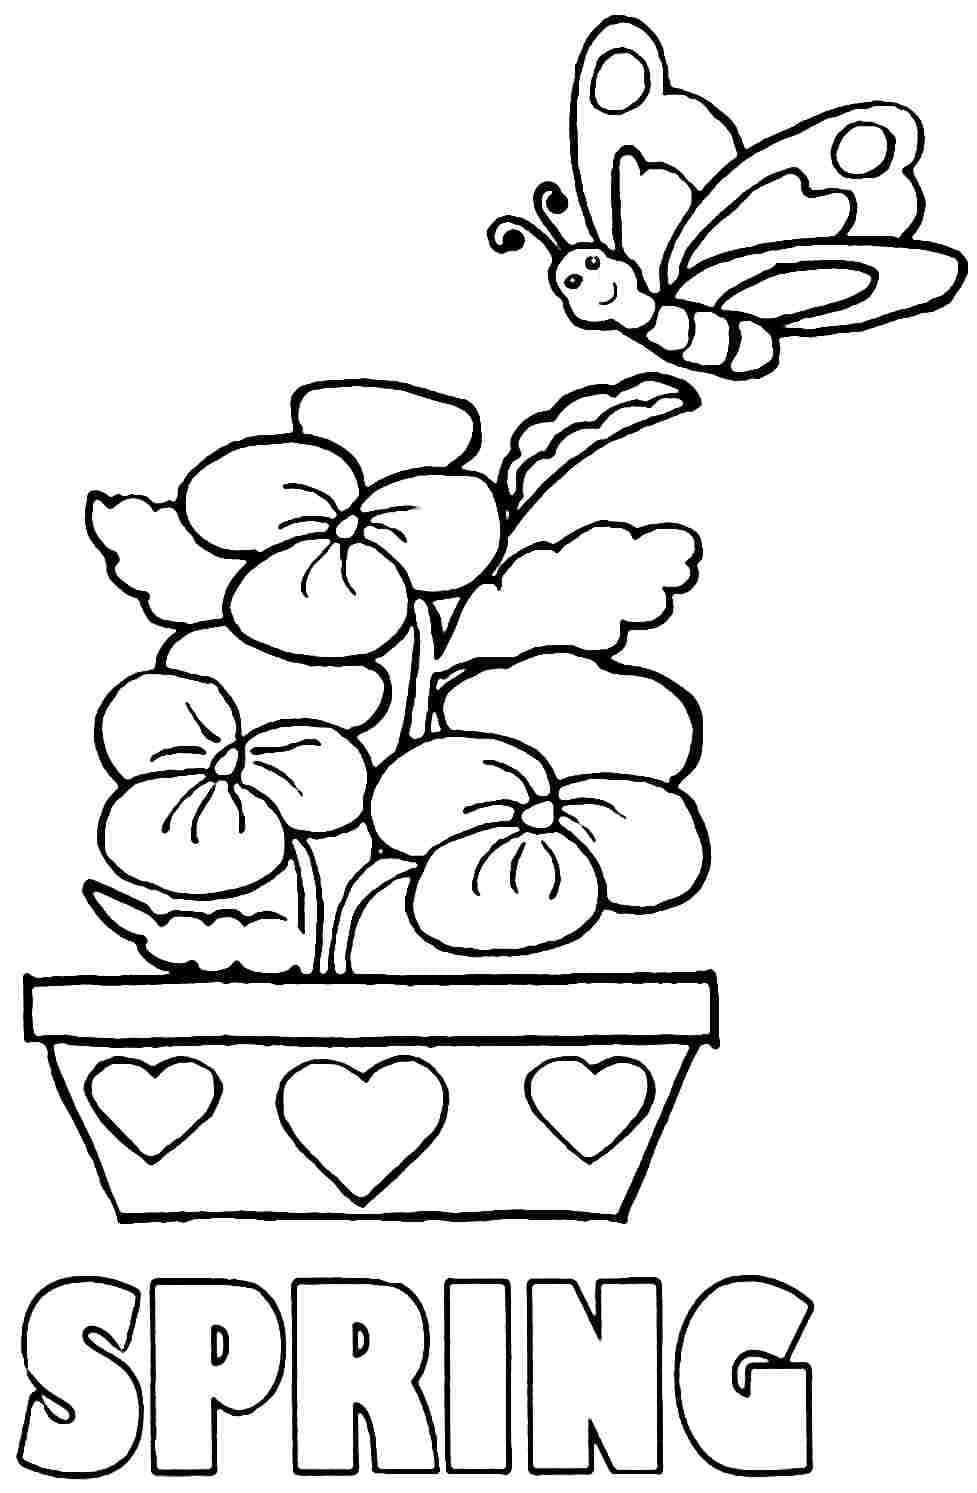 Spring Coloring Pages With Flowers And Butterflies